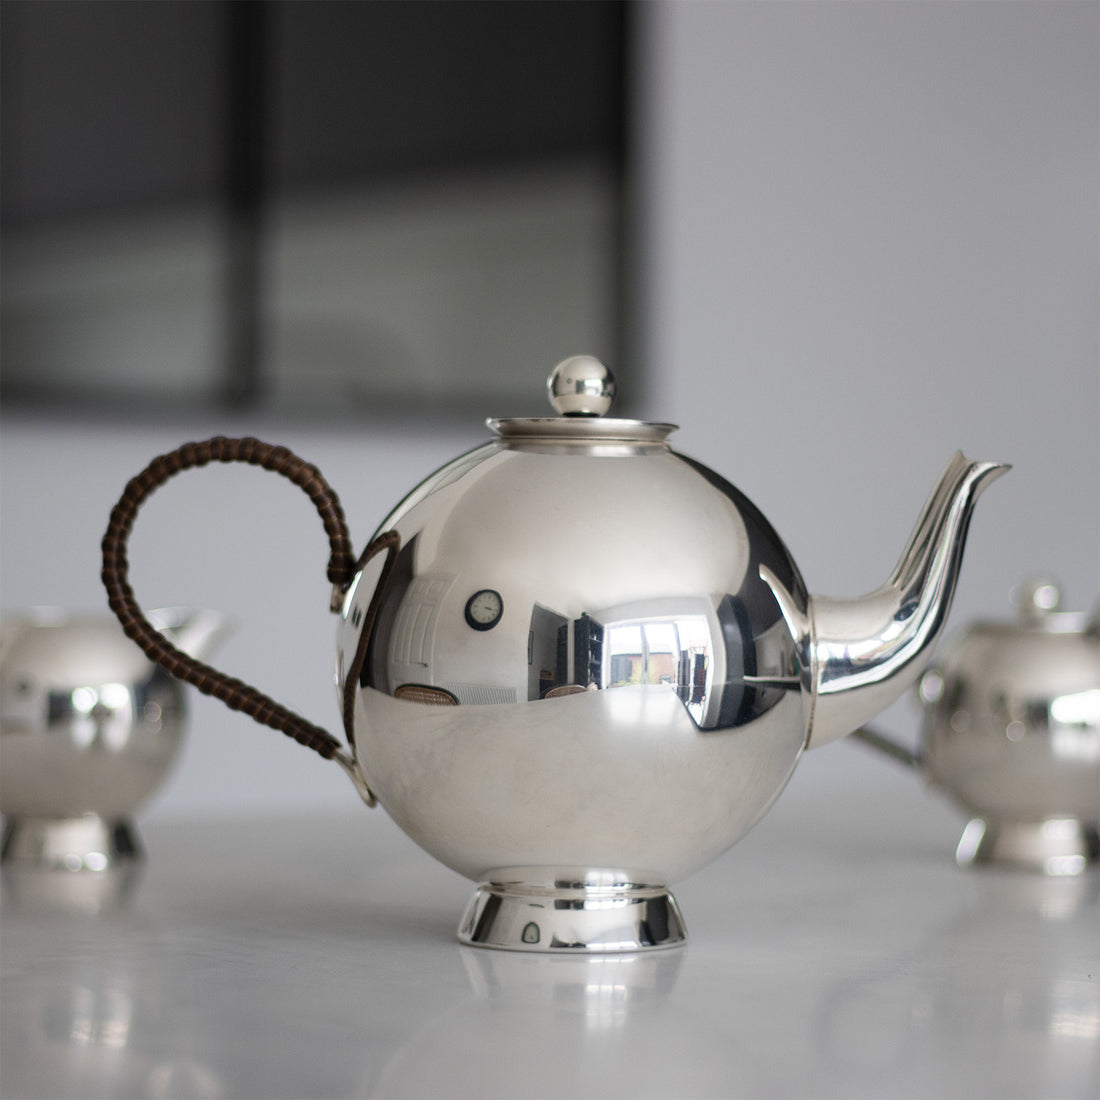 Introducing Our Silver-Plated Spheres Teaware Collection: Elegance Meets Craftsmanship